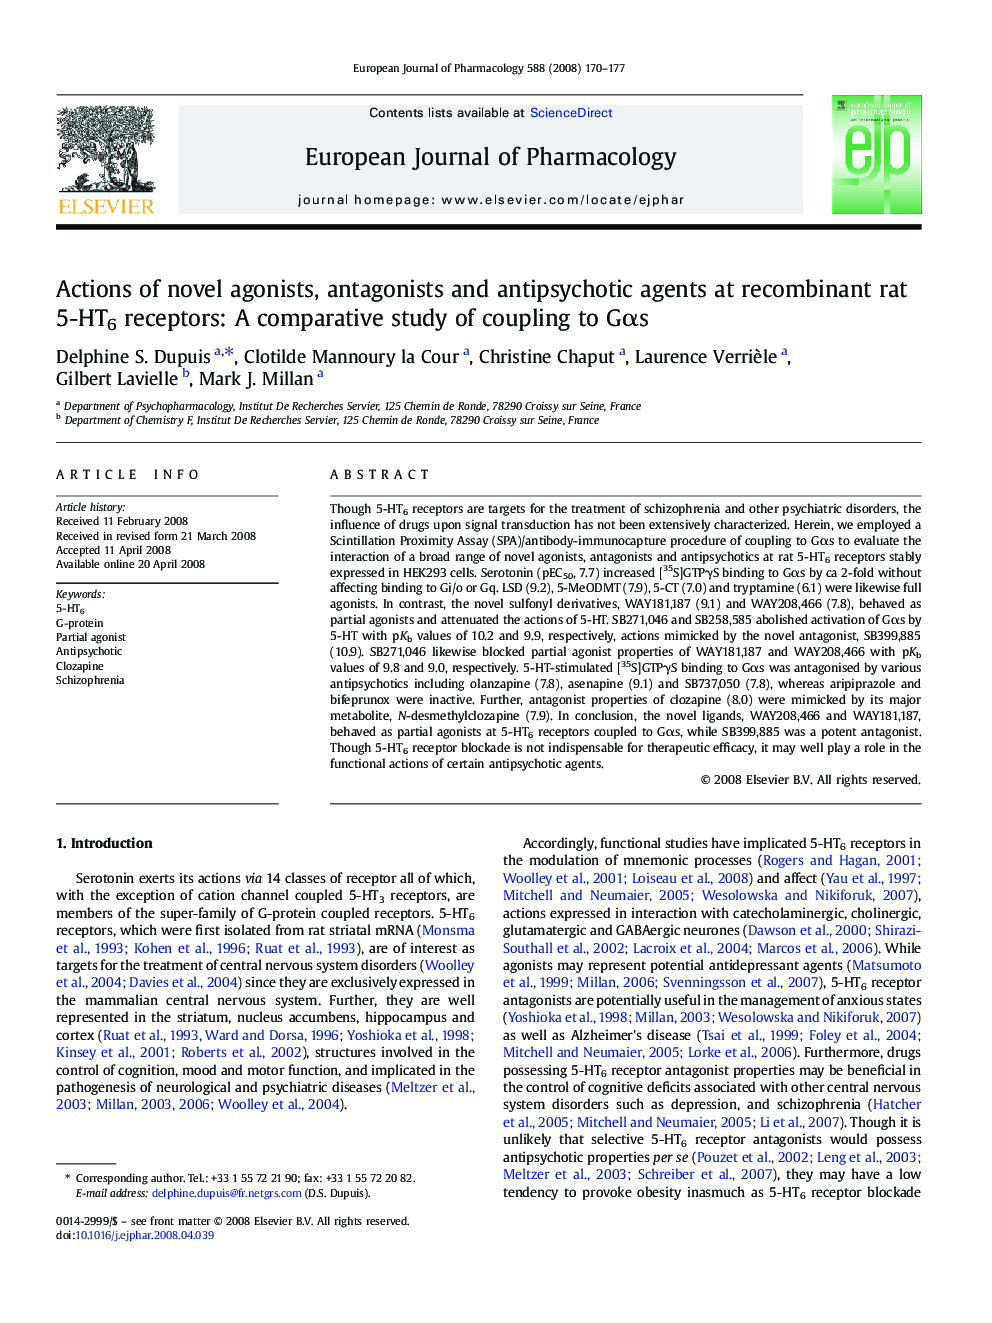 Actions of novel agonists, antagonists and antipsychotic agents at recombinant rat 5-HT6 receptors: A comparative study of coupling to Gαs